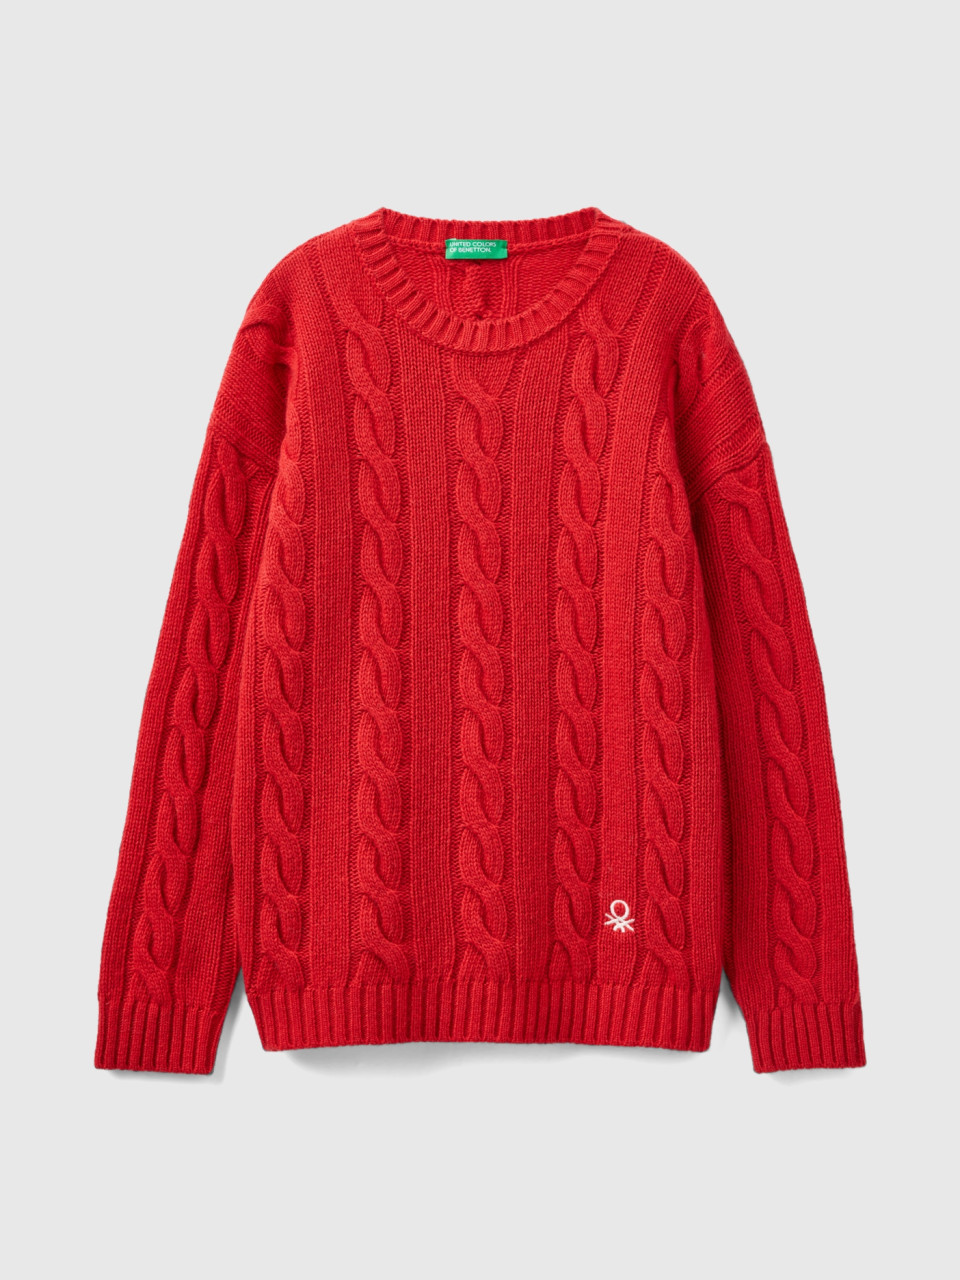 Benetton, Cable Knit Sweater In Wool Blend, Red, Kids